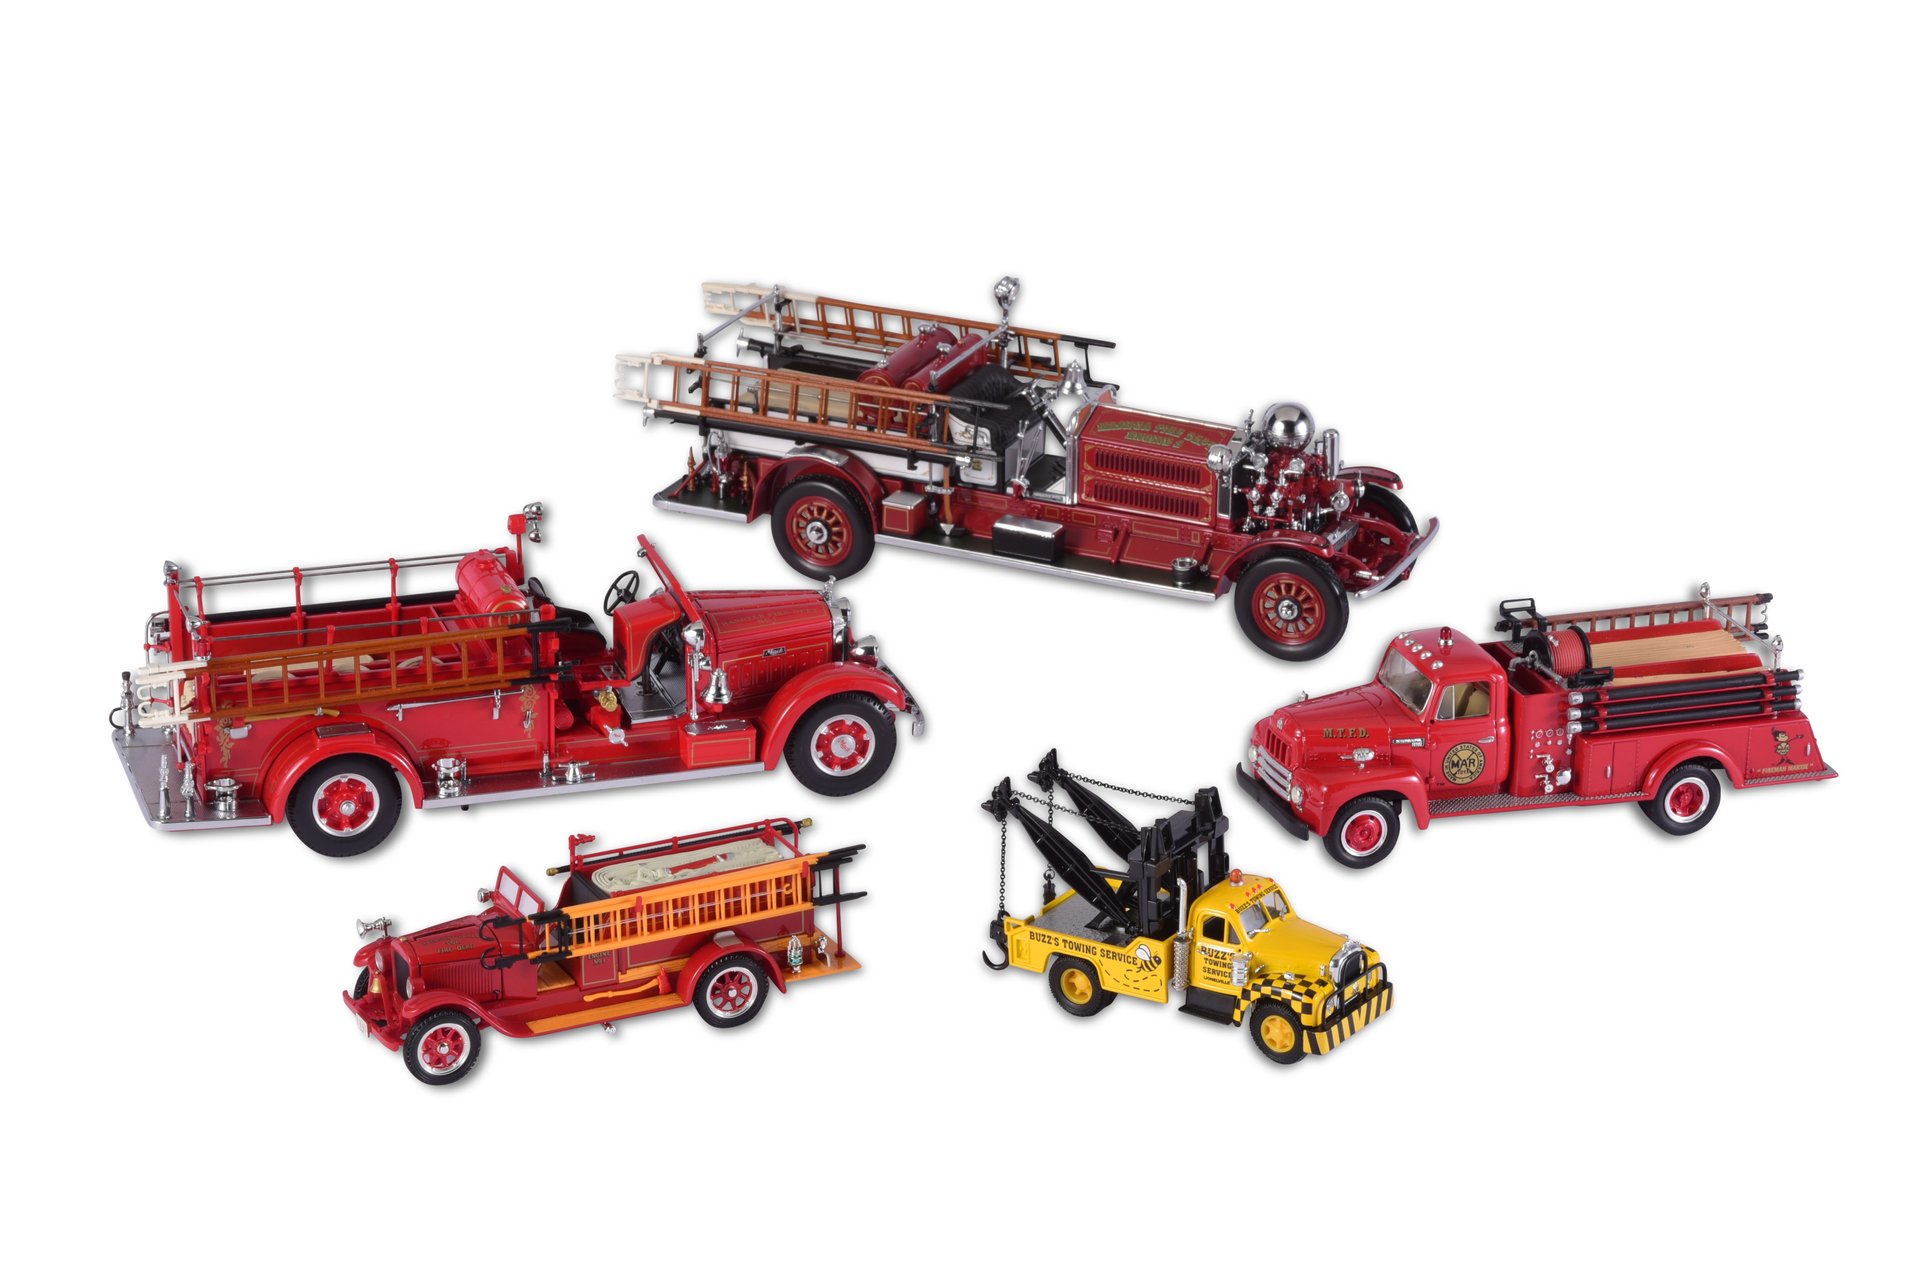 For Sale Group of Fire Engine Models